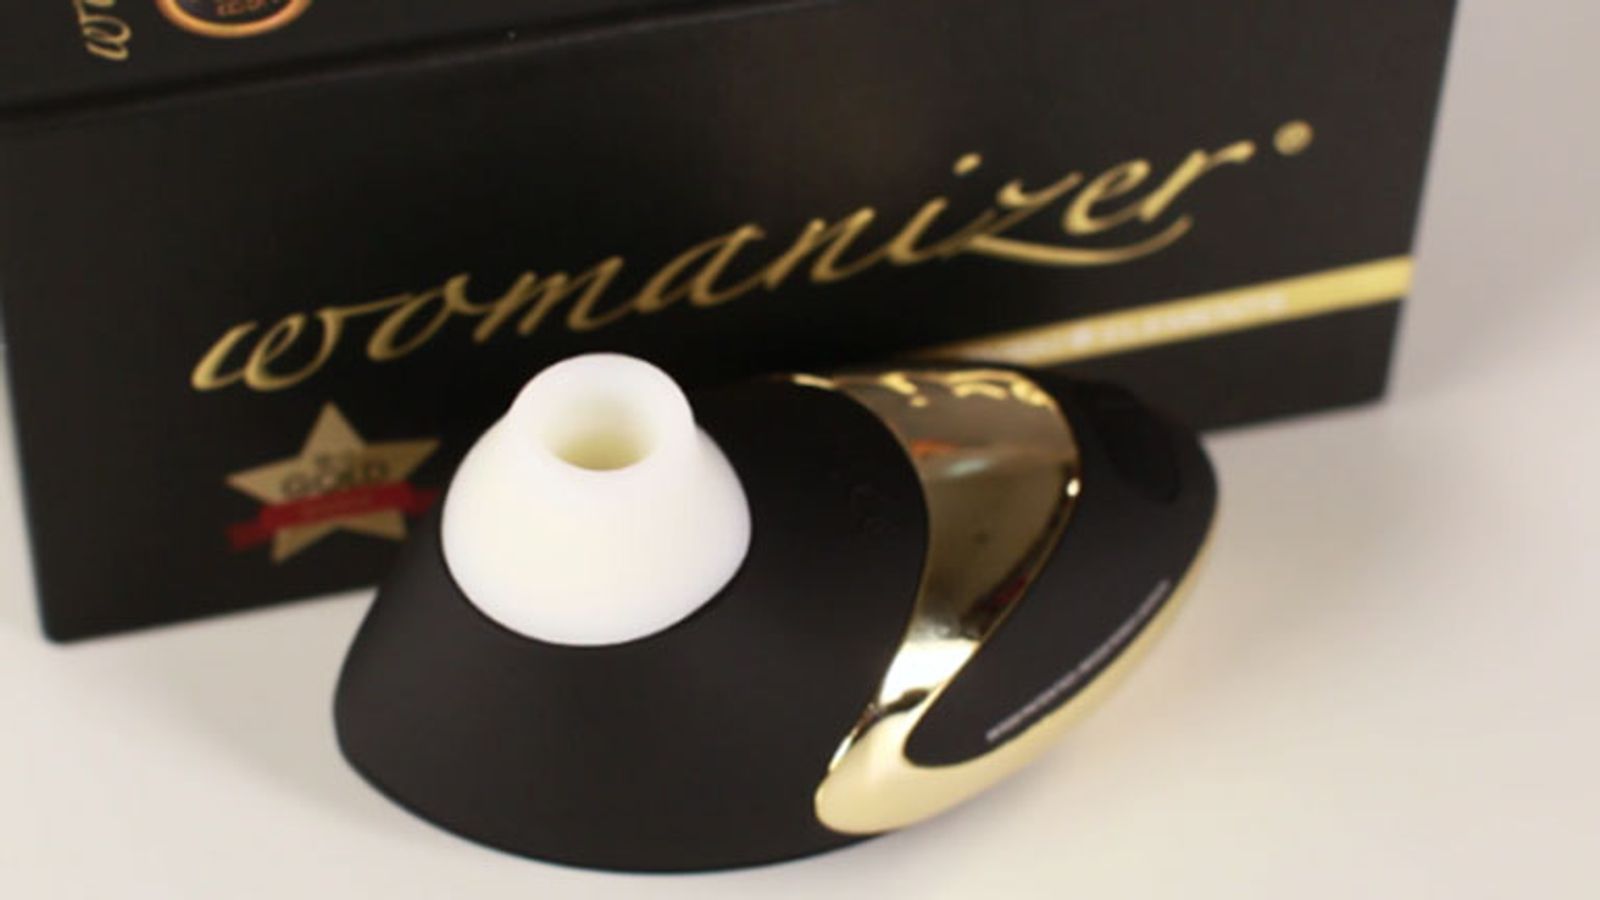 Buzzfeed Staffers Get Off With Womanizer Adult Massager